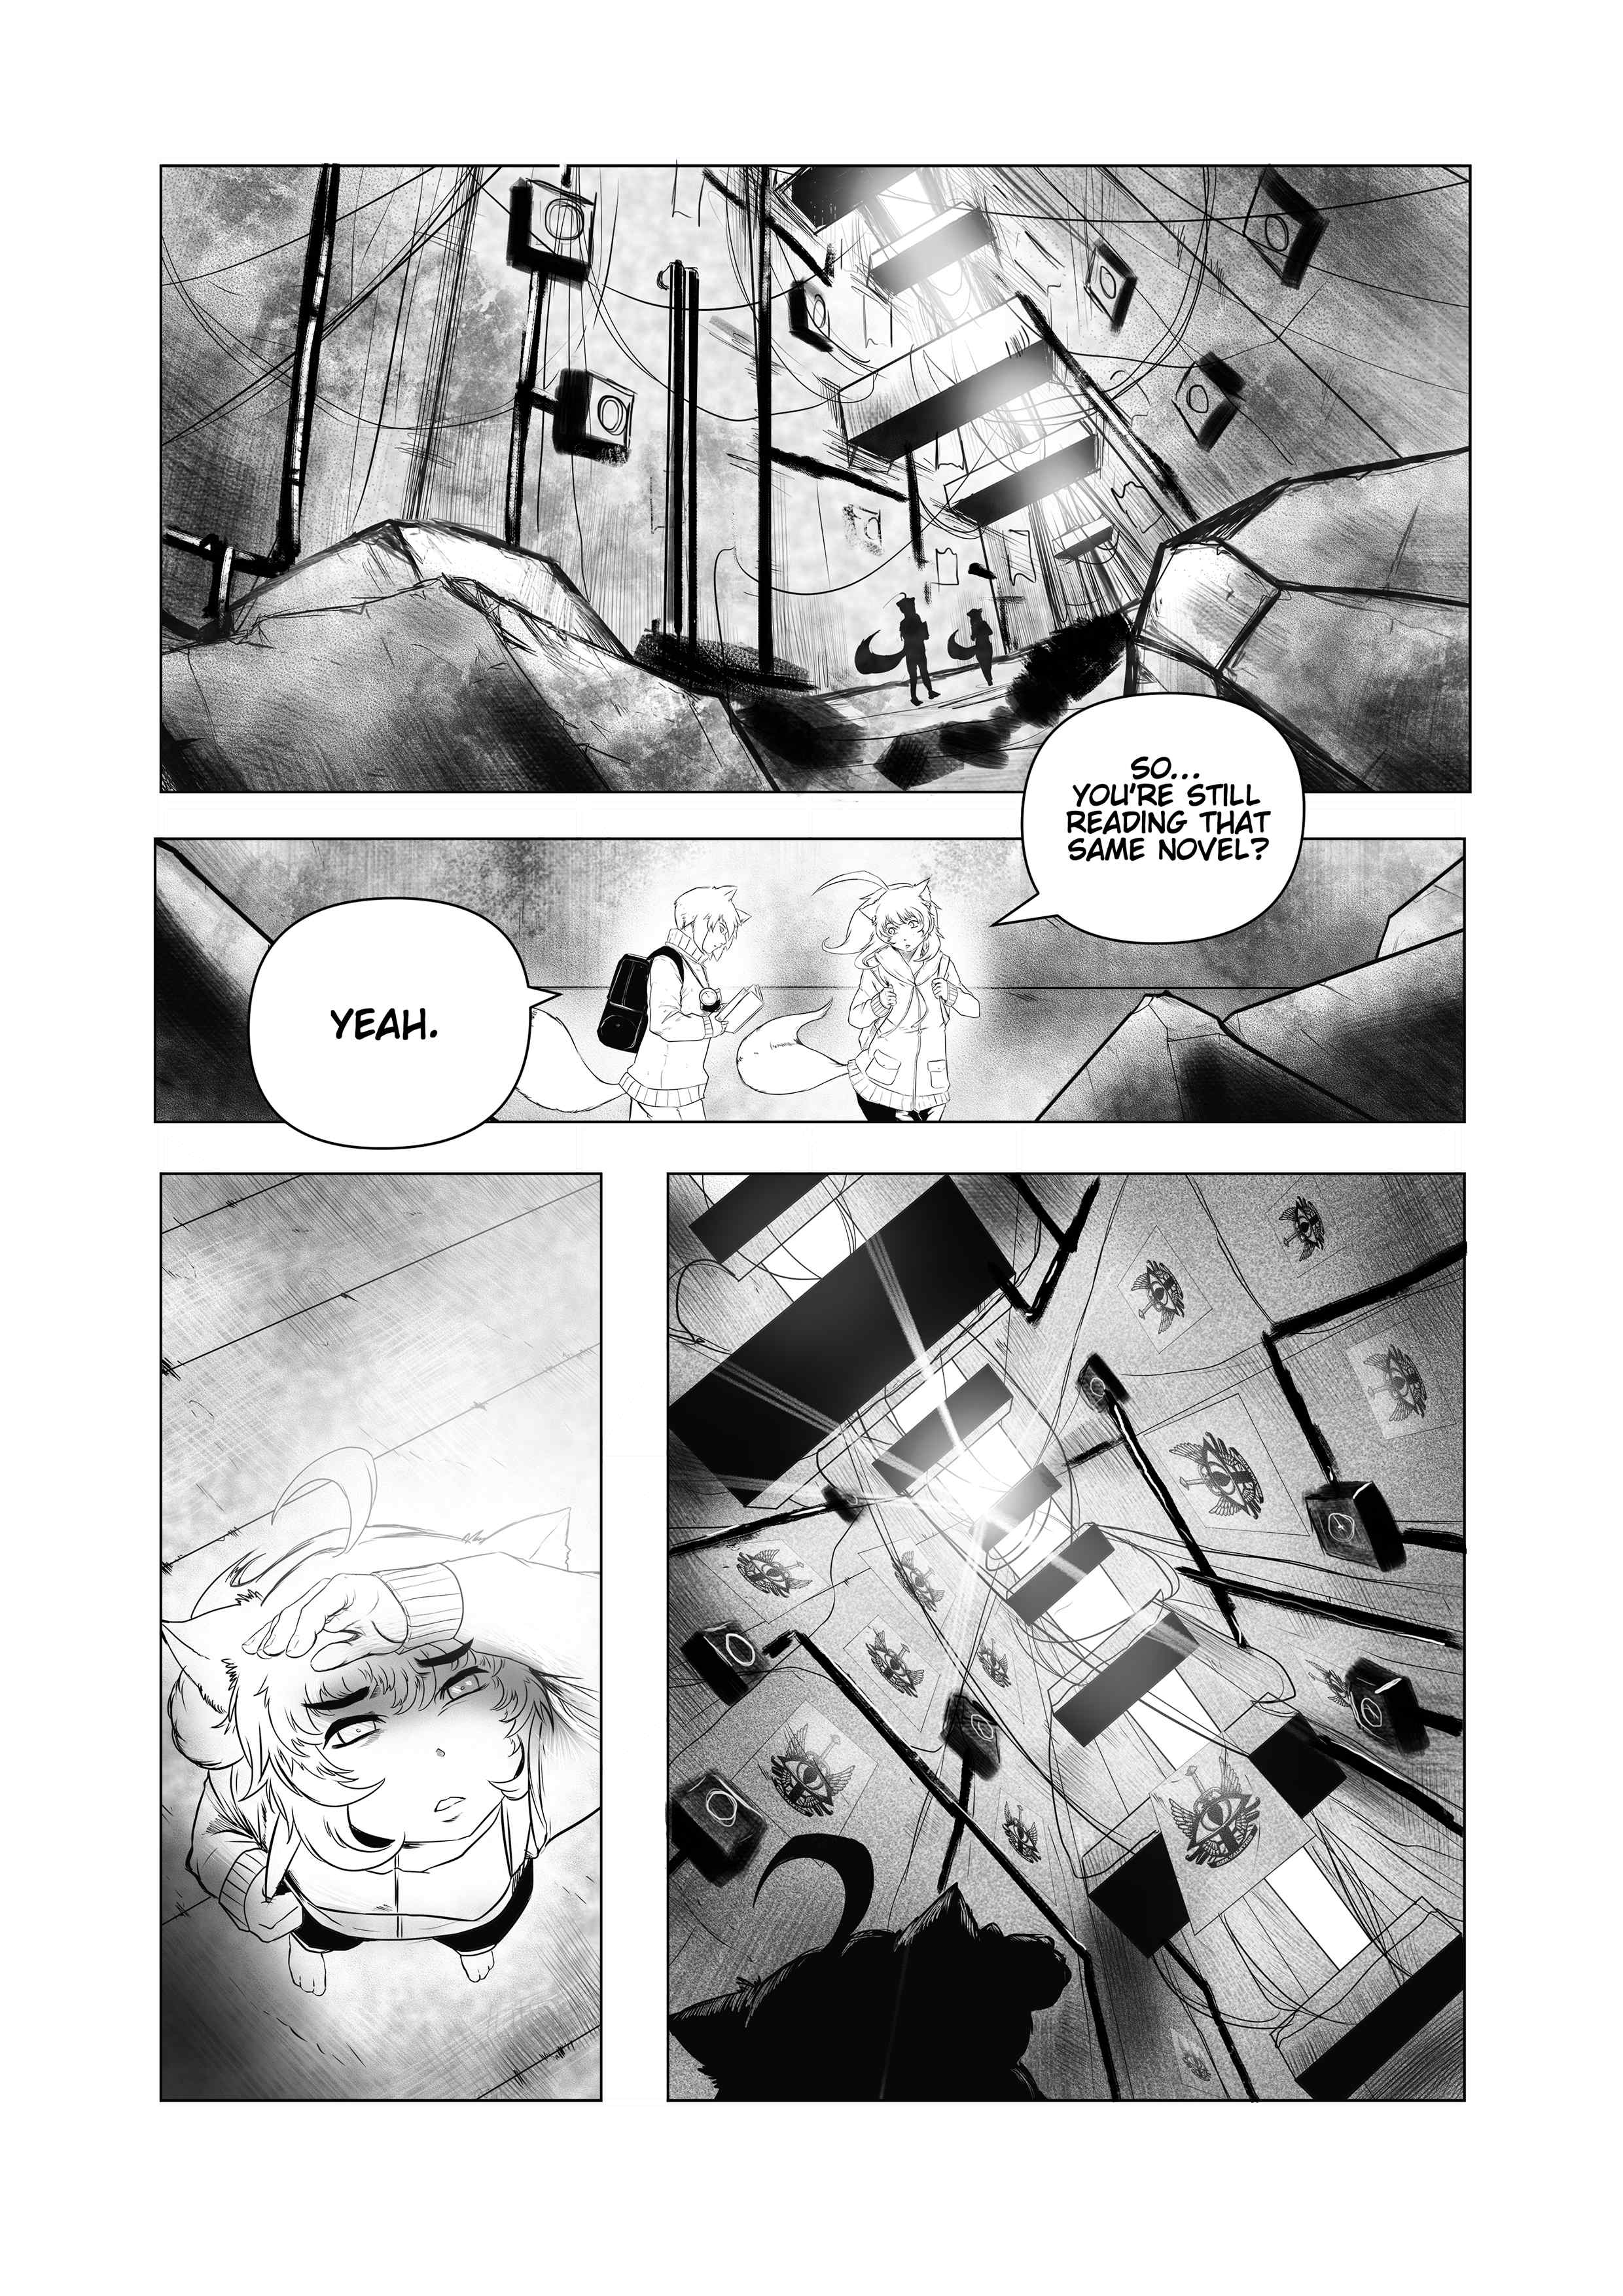 How We End - Page 2